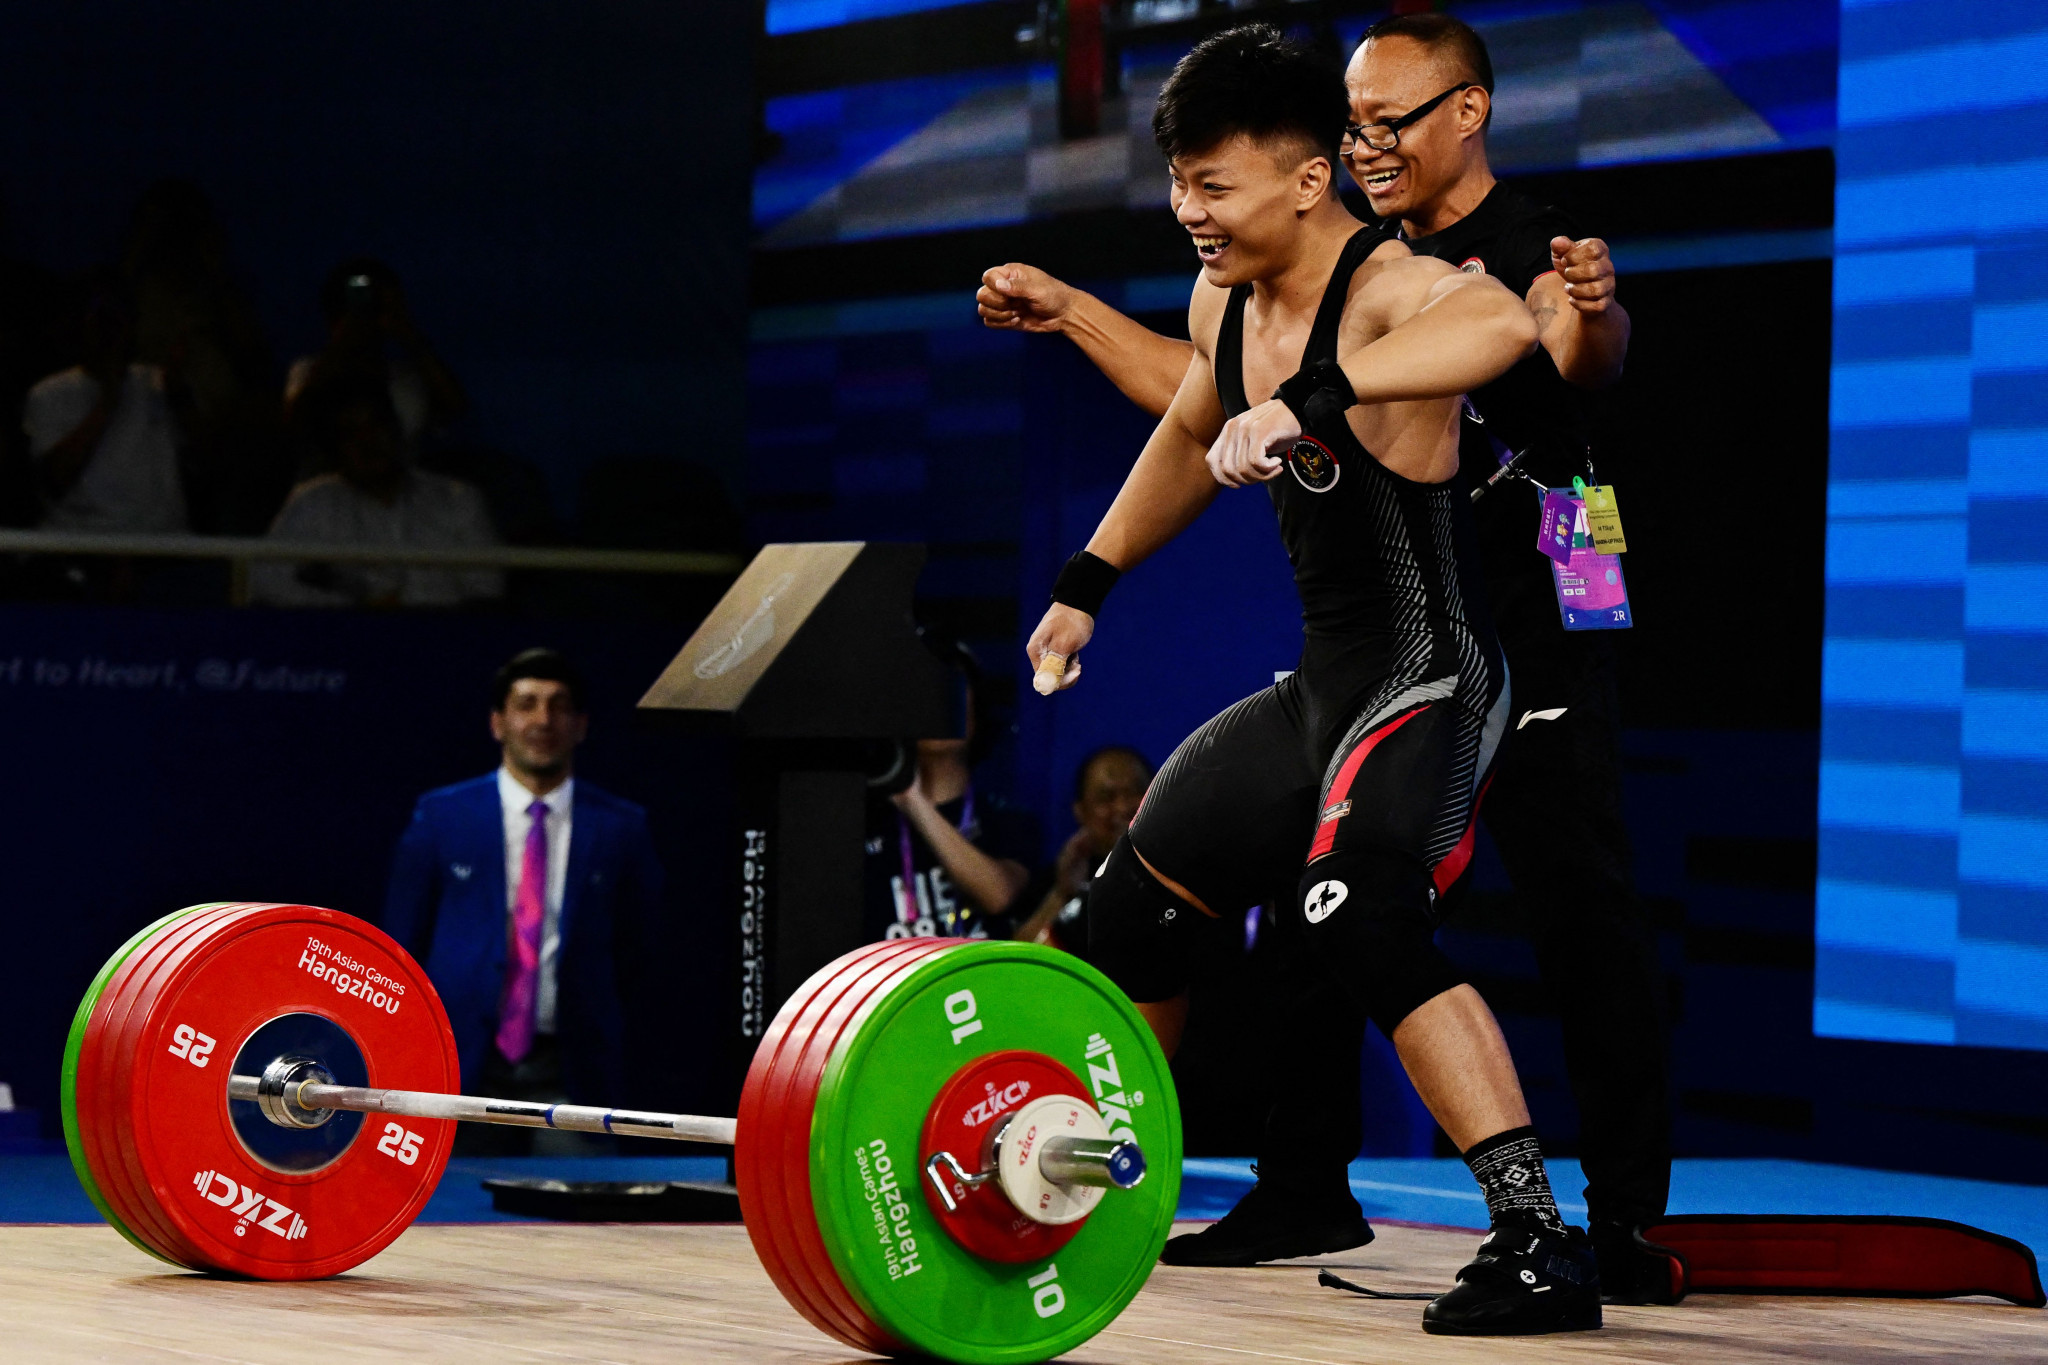 Weightlifter Erwin celebrates with dad after another world record at Asian Games 